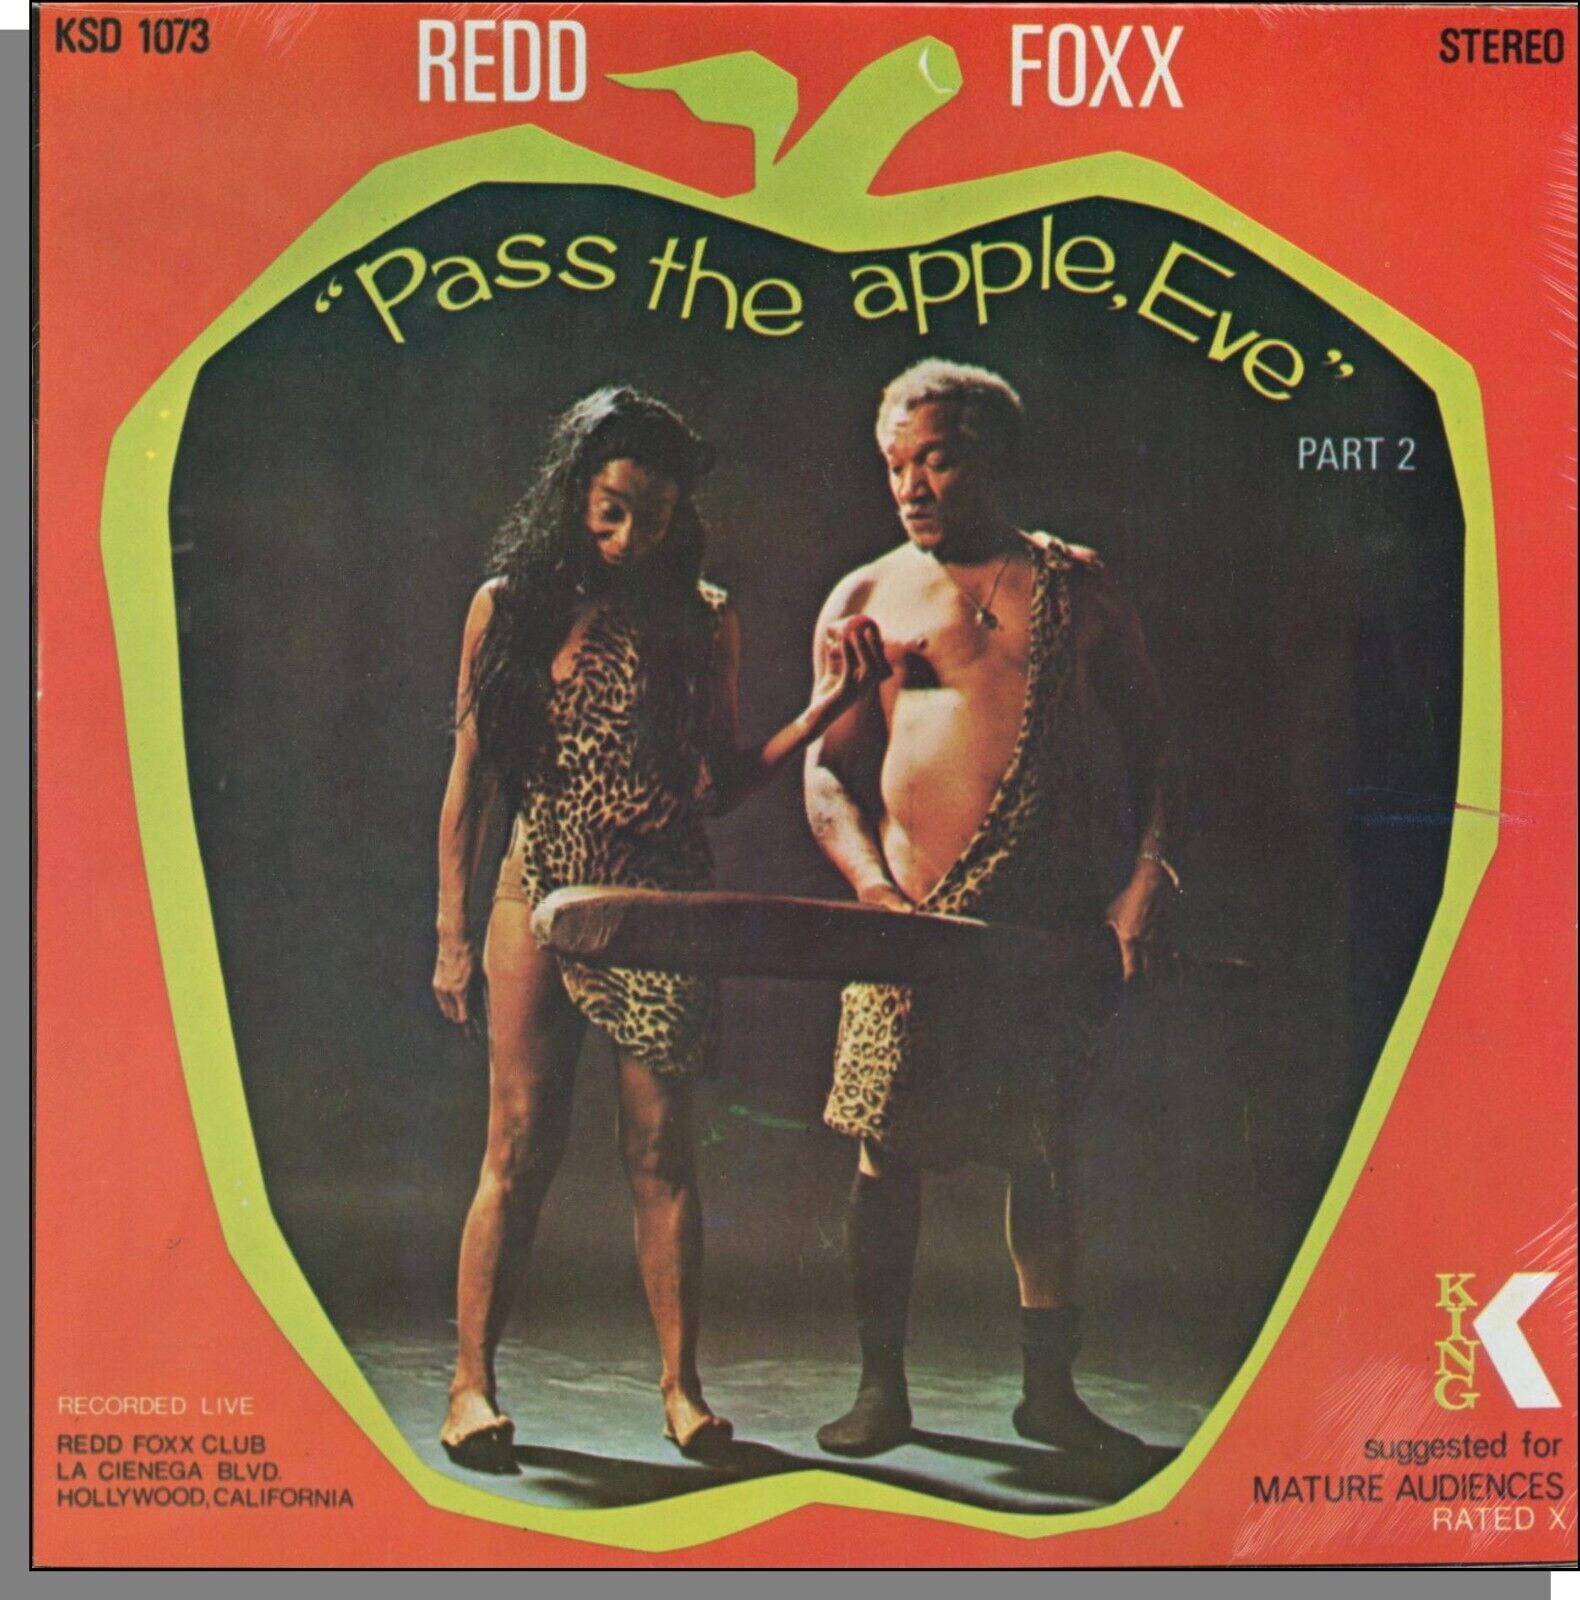 Redd Foxx - Pass the Apple, Eve (Part 2) - New 1975 Adult Comedy LP Record